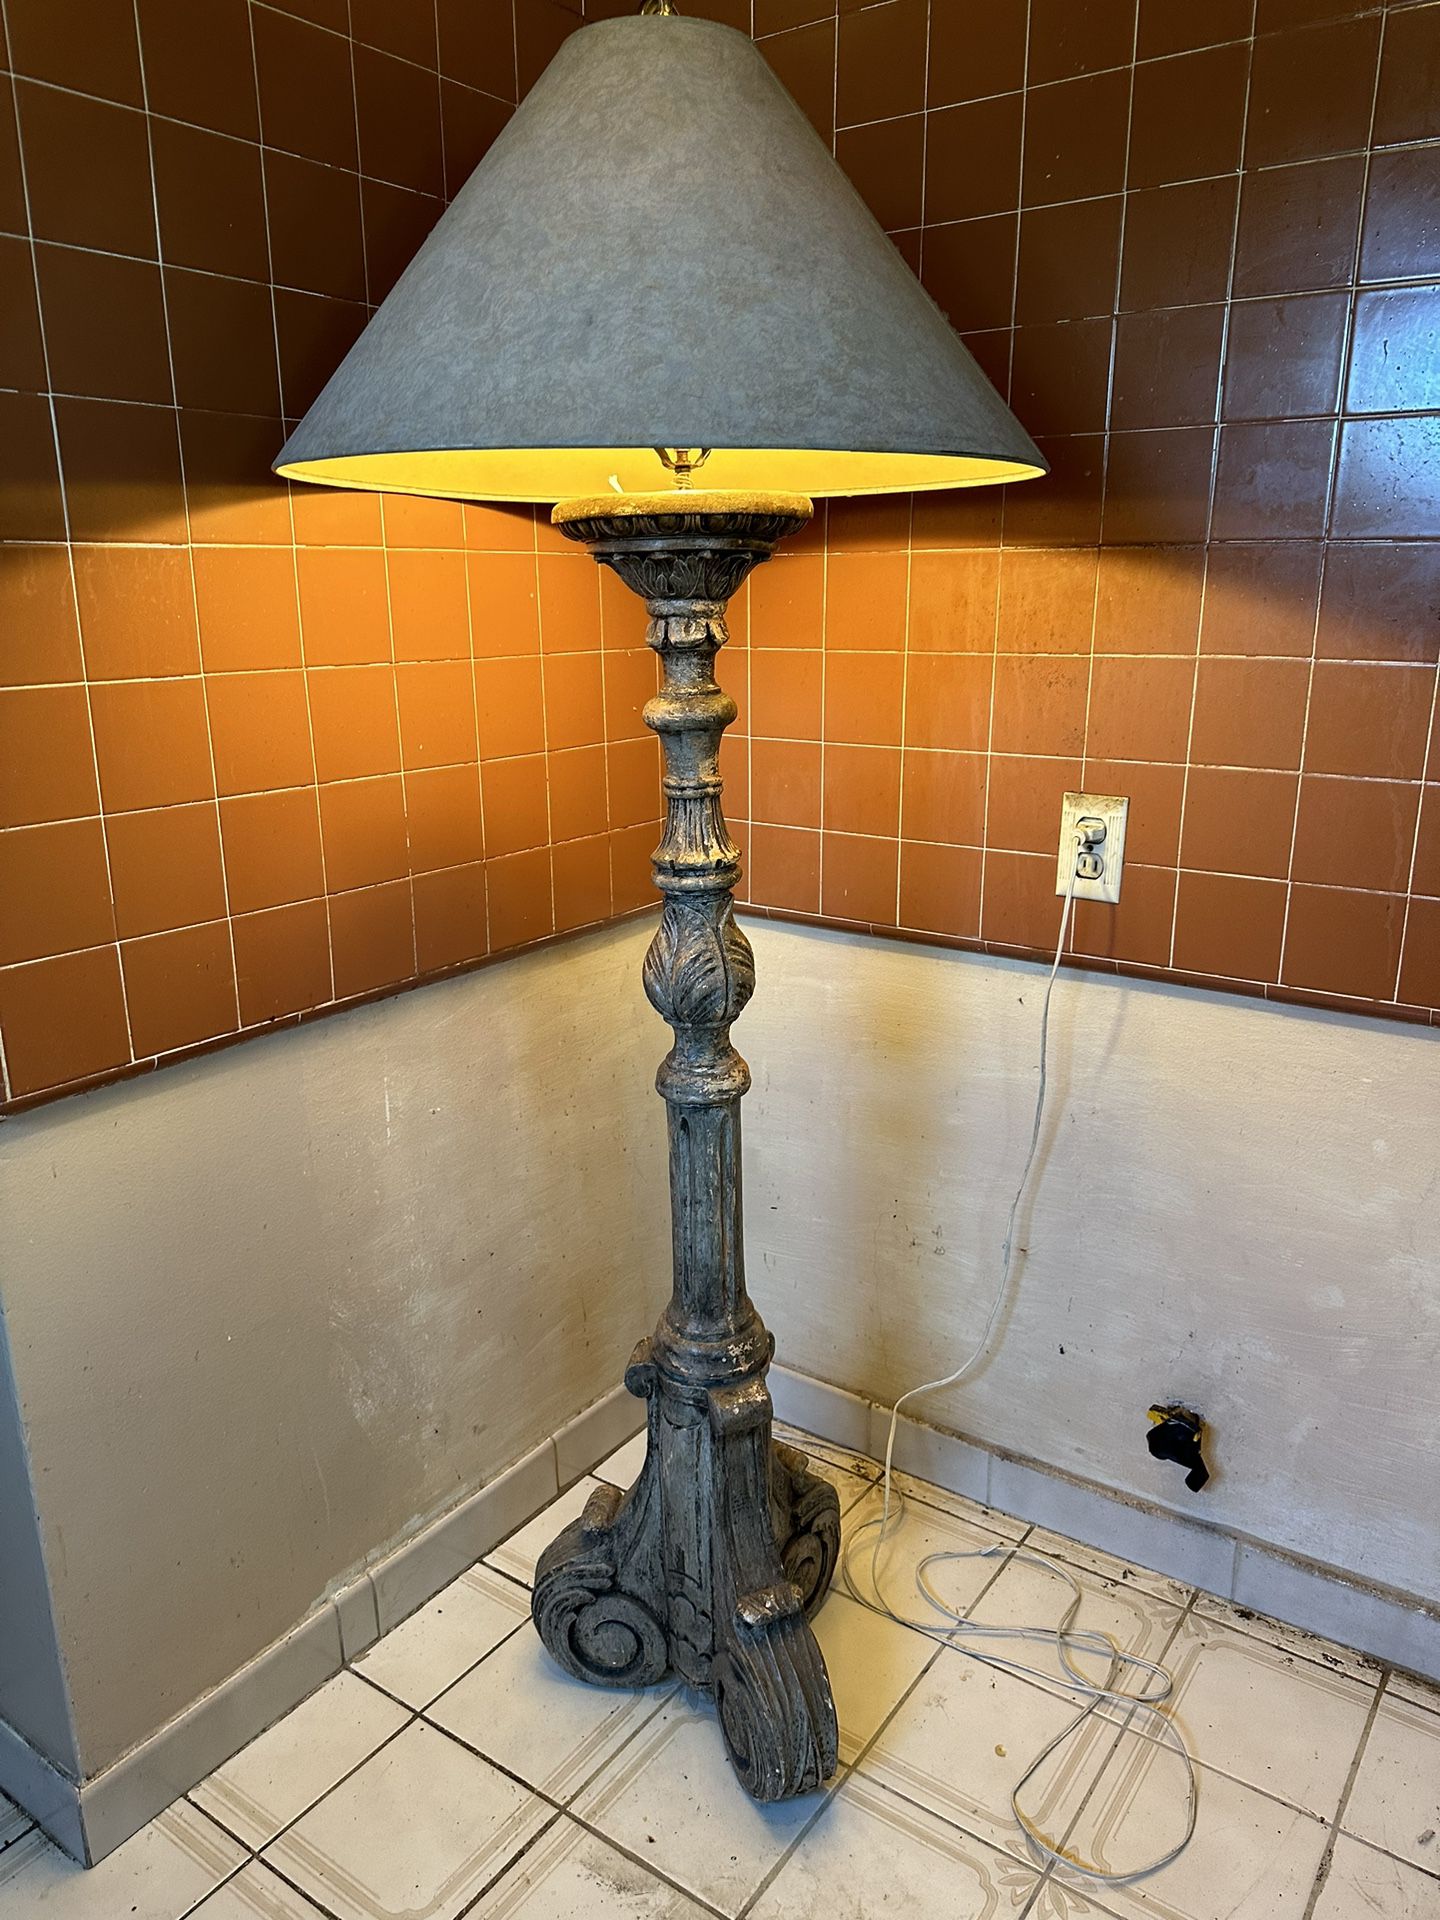 Beautiful Antique Carved Wood Floor Lamp $287.00 Pick Up In Glendale 